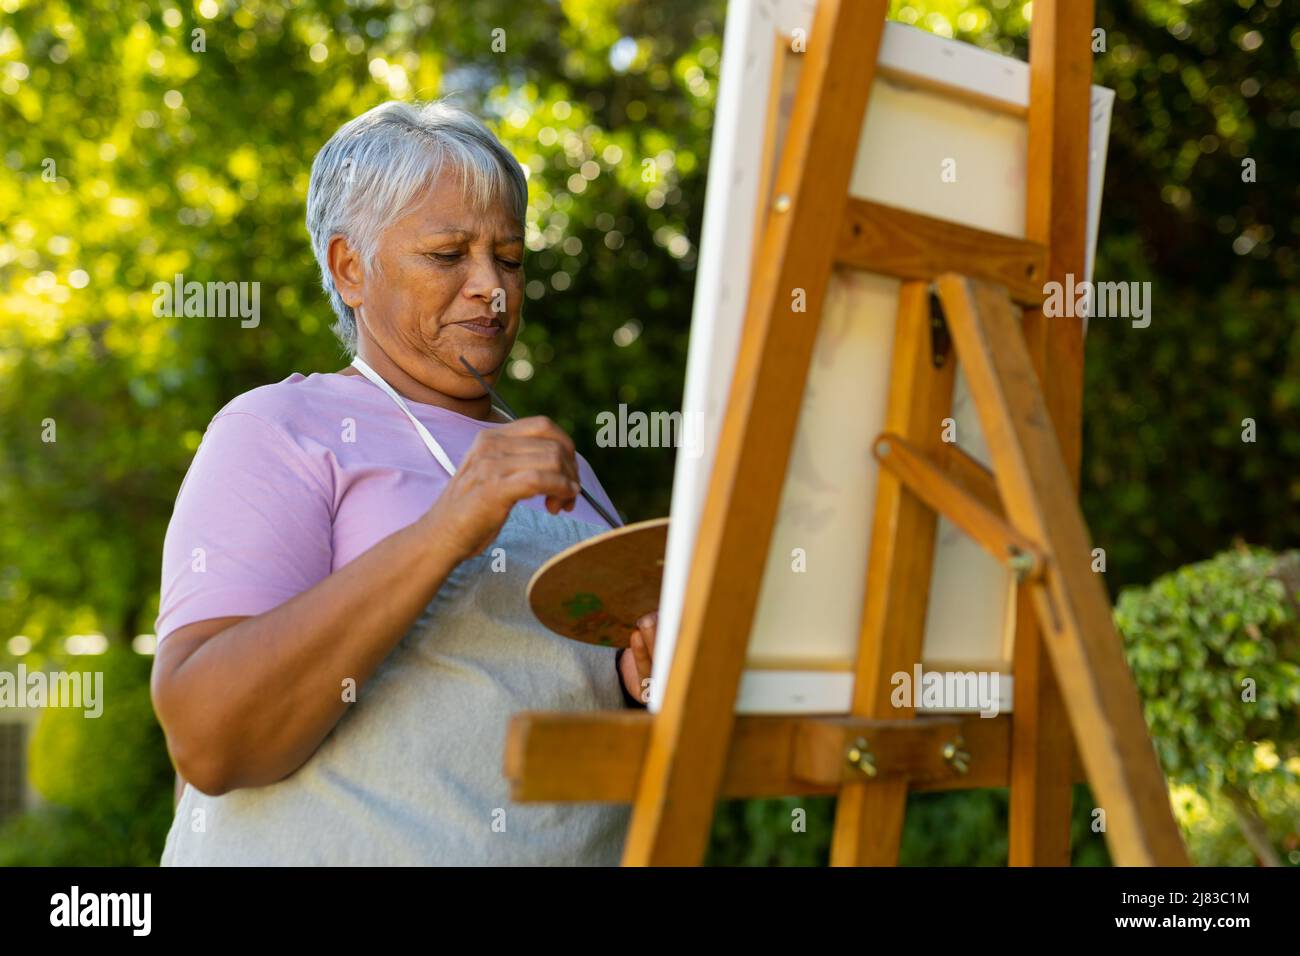 Low angle view of biracial senior woman with short hair painting with watercolors on canvas in yard Stock Photo